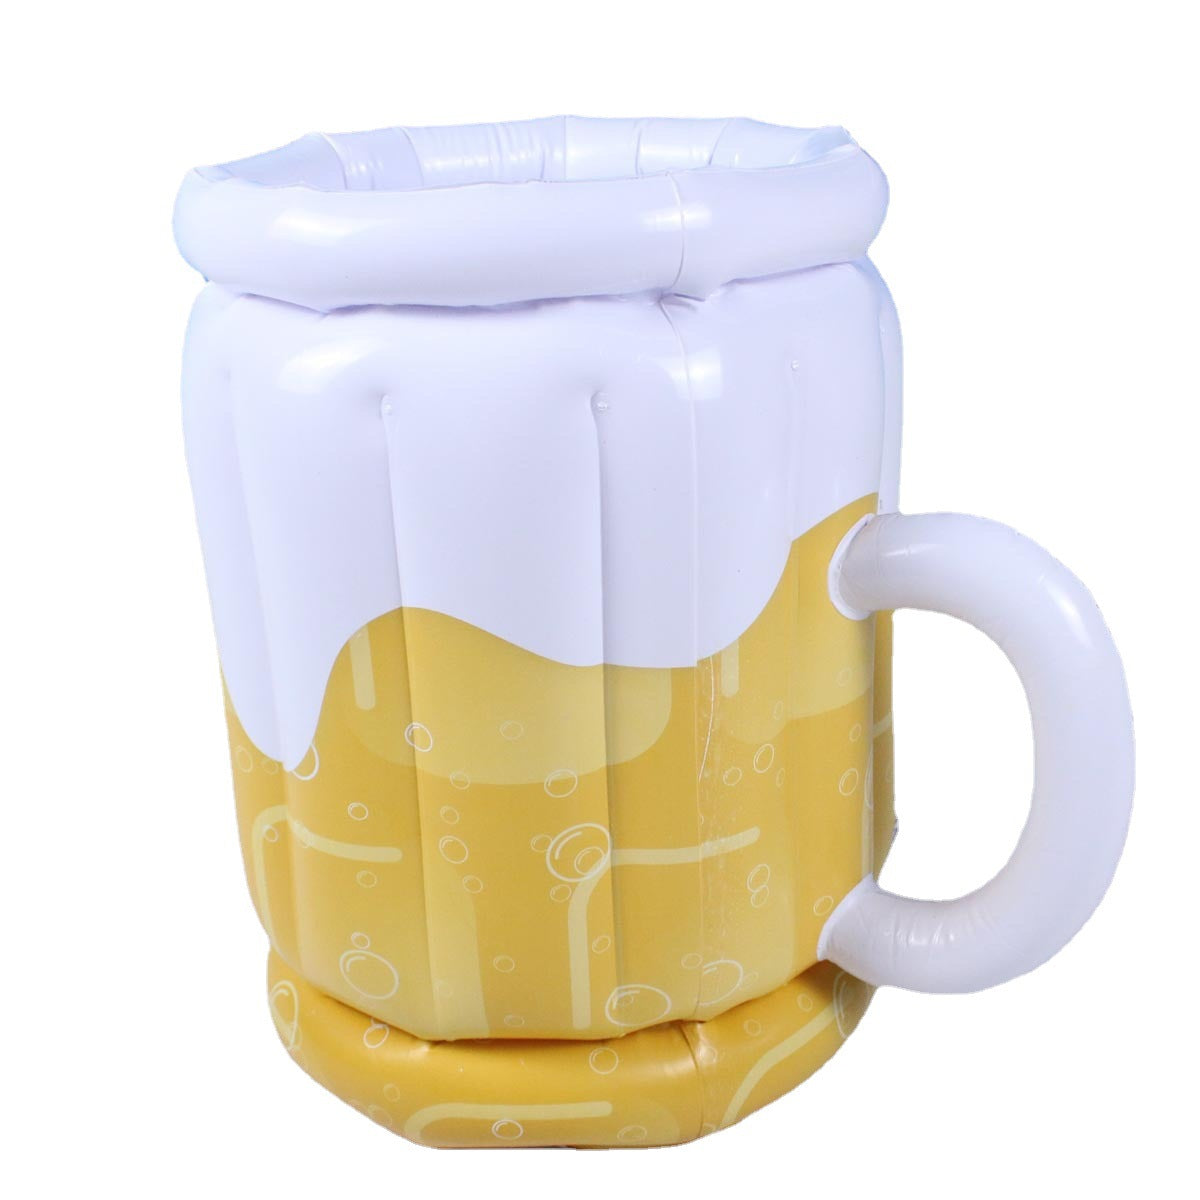 Large Inflatable Beer Mug Cooler Pool Float Drink Cooler For Adults Parties - Minihomy